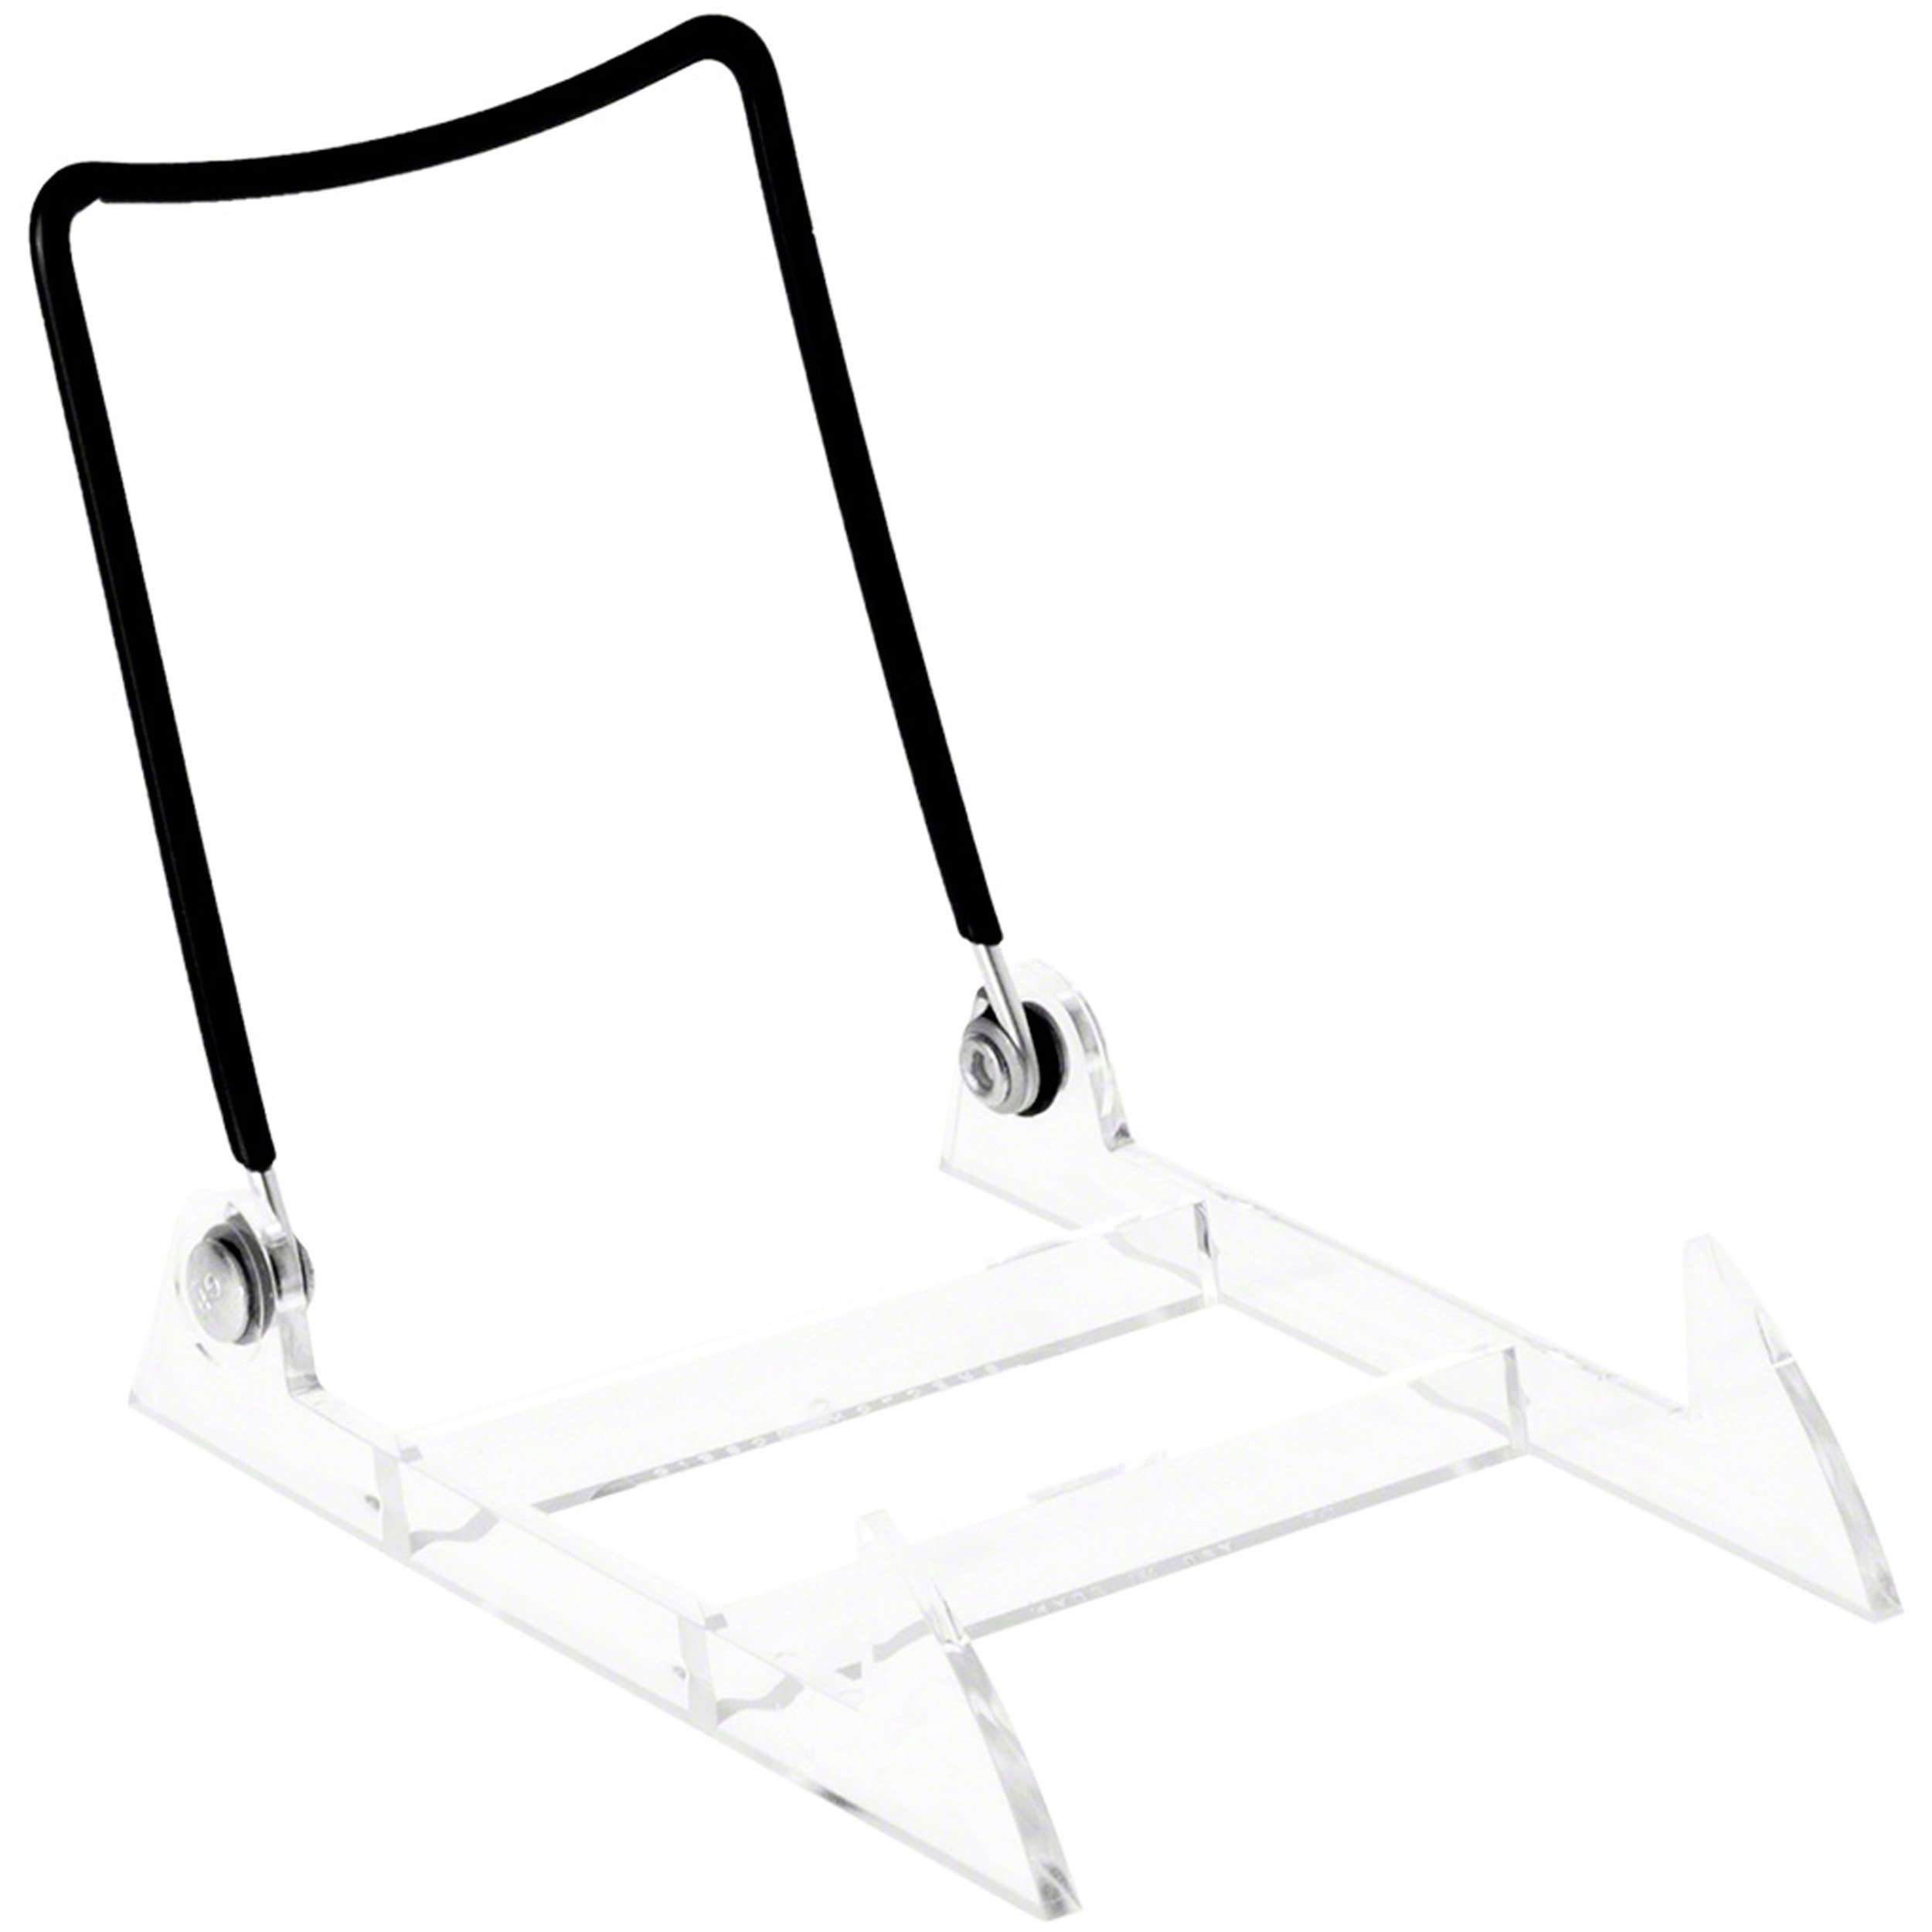 Gibson Holders 2PL Adjustable Black Wire and Clear Acrylic Display Easel, 4" W x 5.5" D x 4.75" H, Pack of 6 - image 1 of 1